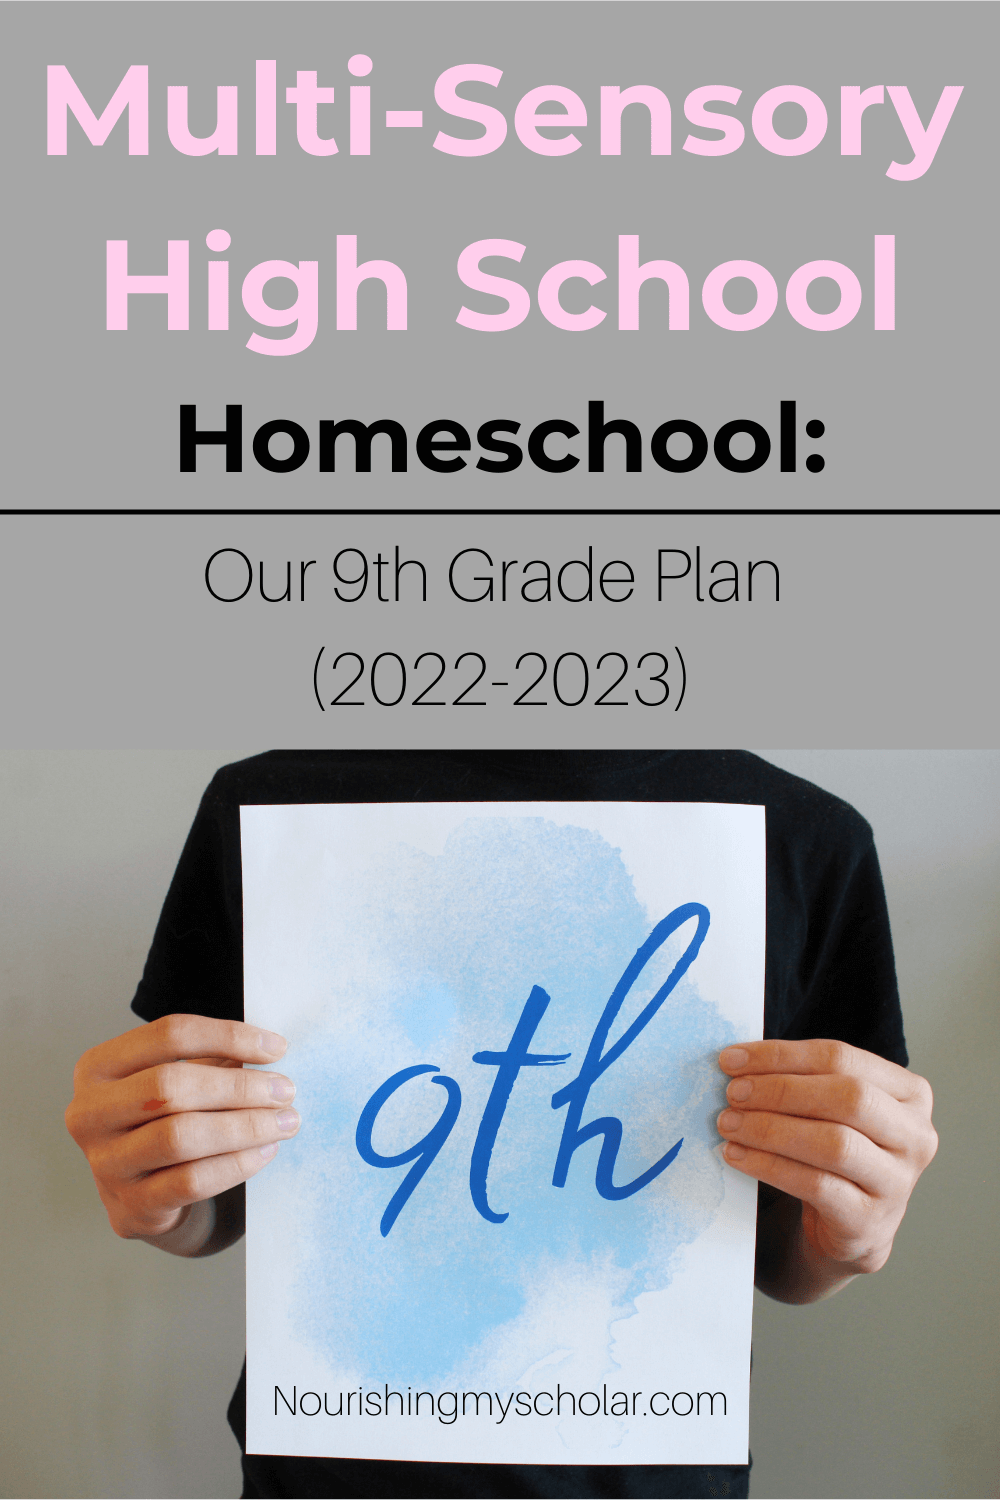 Multi-Sensory High School: Our 9th Grade Plan (2022-2023) -High School is looming so my son and I are planning how he wants his 9th-grade year to look. Here are the resources he and I have chosen for his multi-sensory high school. #homeschool #highschool #homeschoolhighschool #9thgrade #ninthgrade